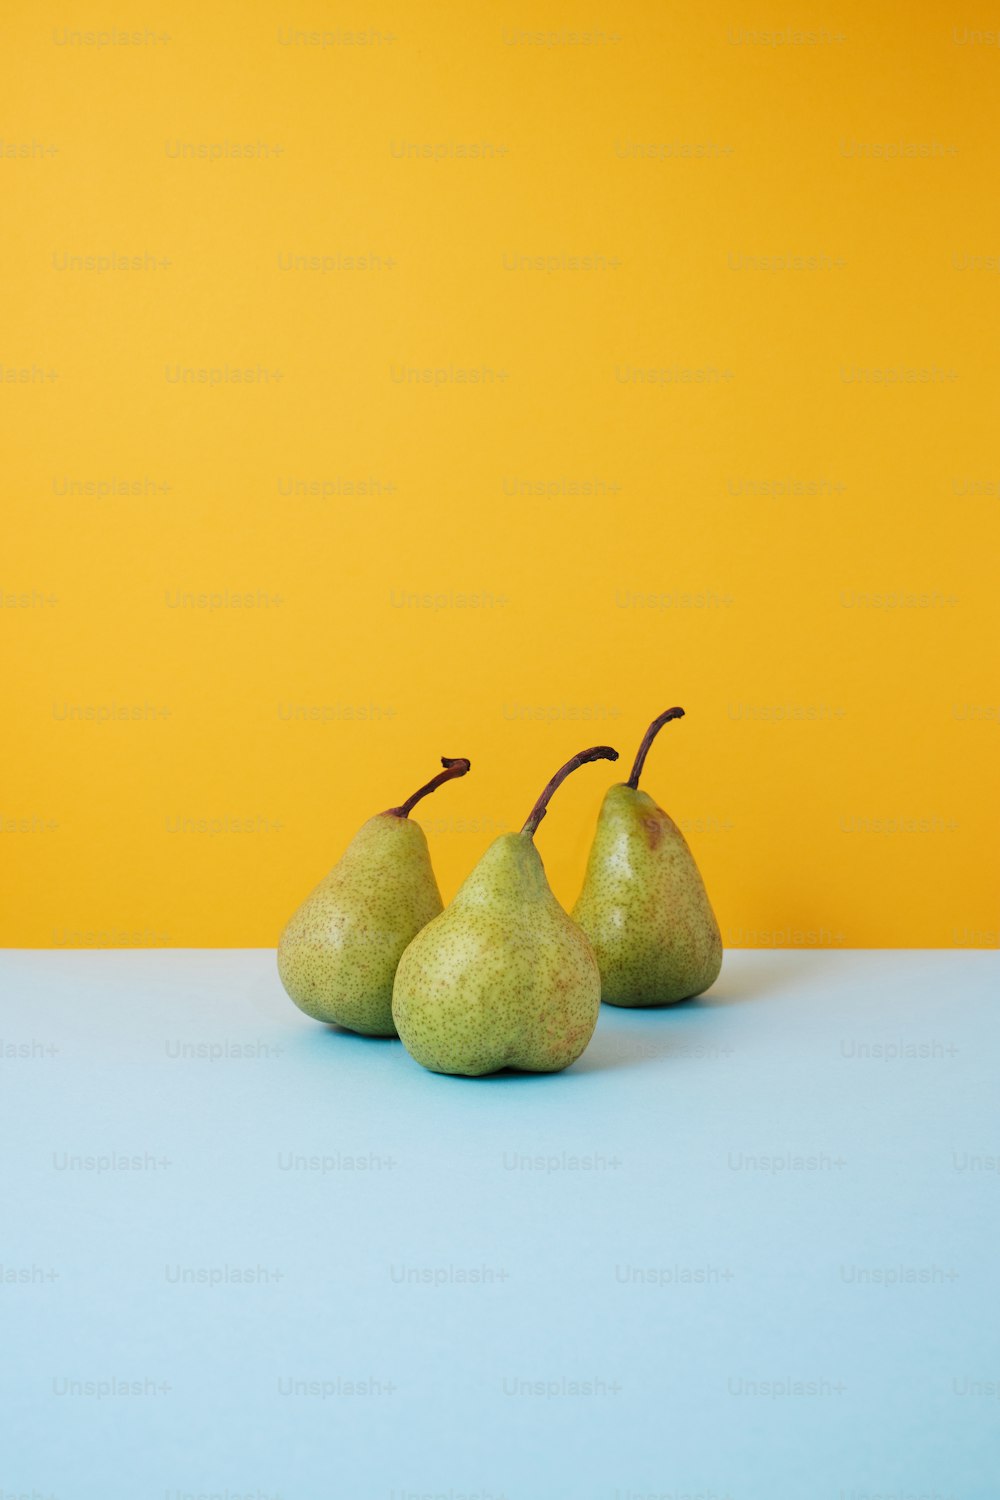 three pears sitting on a blue surface in front of a yellow wall